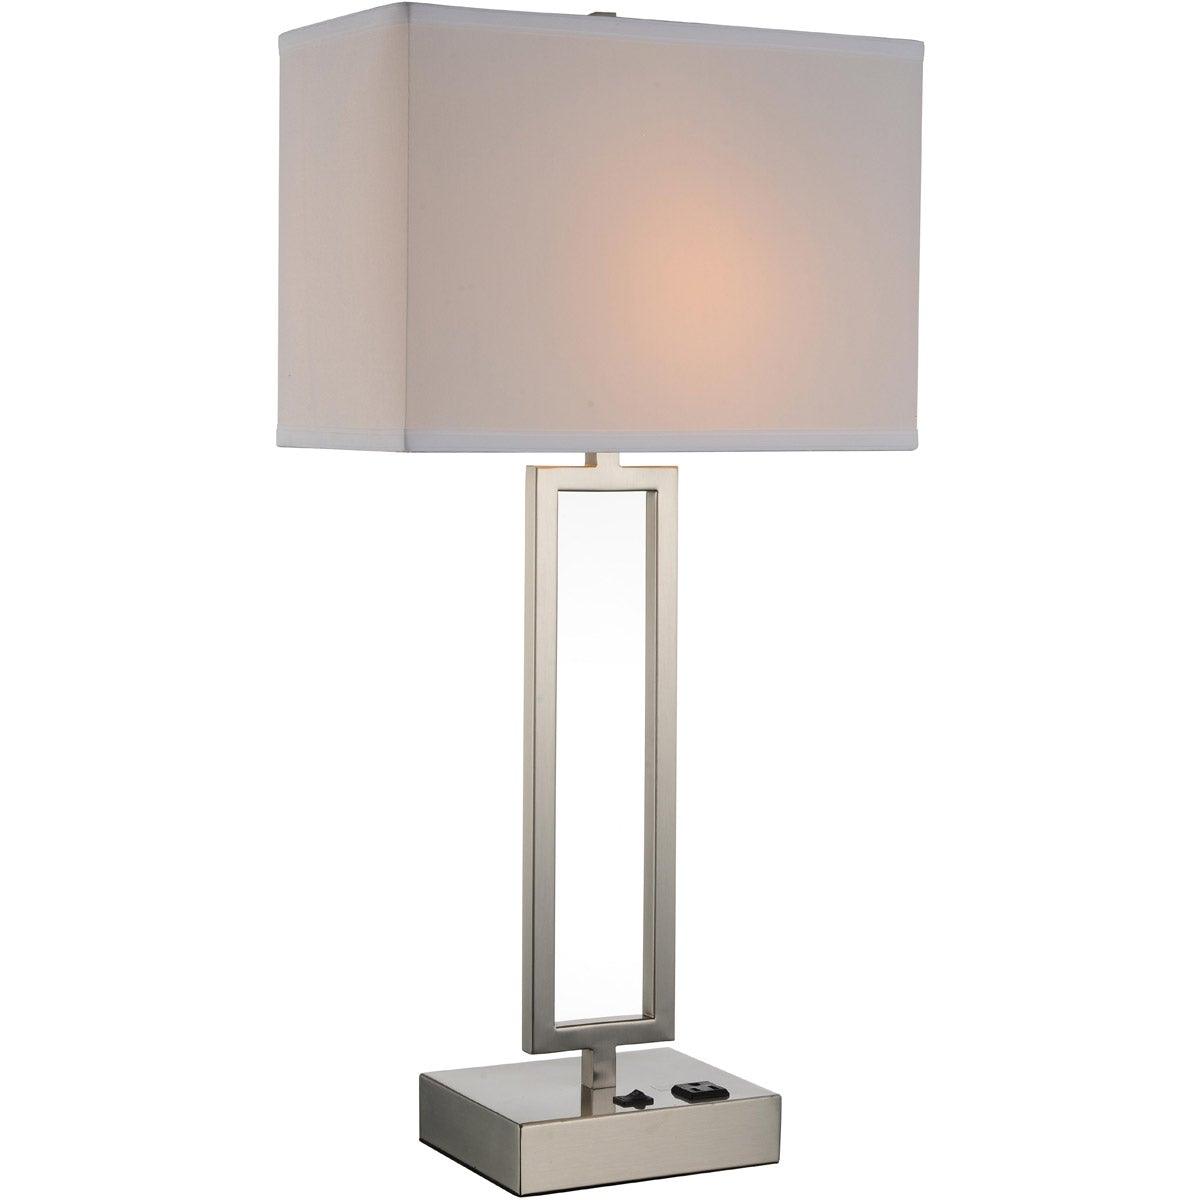 Satin Nickel with White Fabric Shade Table Lamp - LV LIGHTING